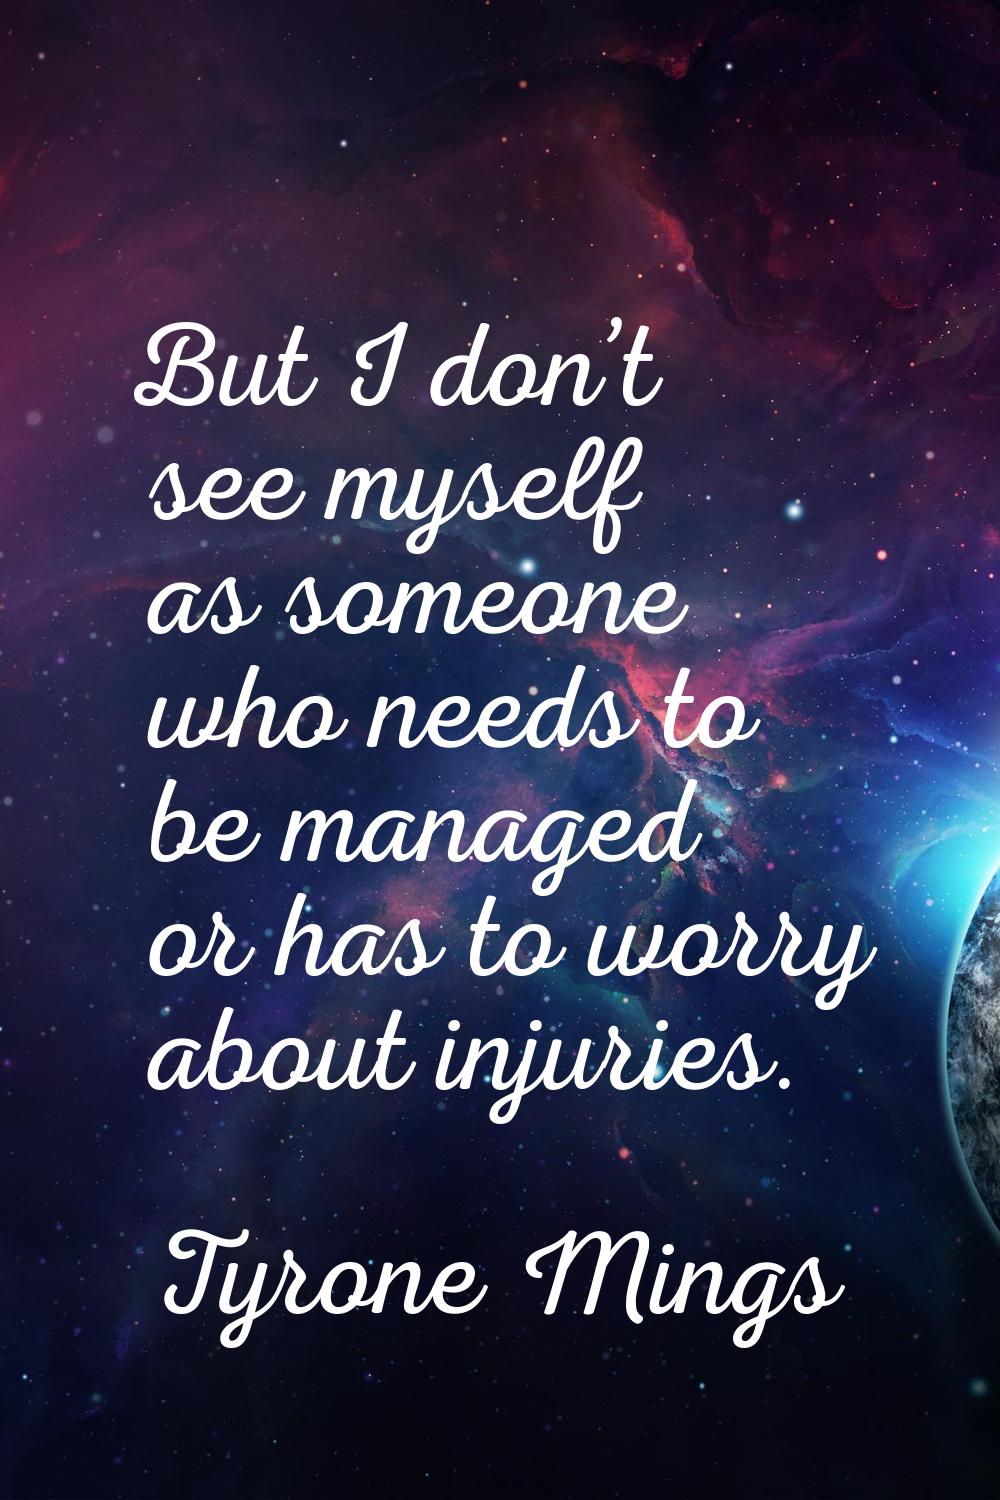 But I don’t see myself as someone who needs to be managed or has to worry about injuries.